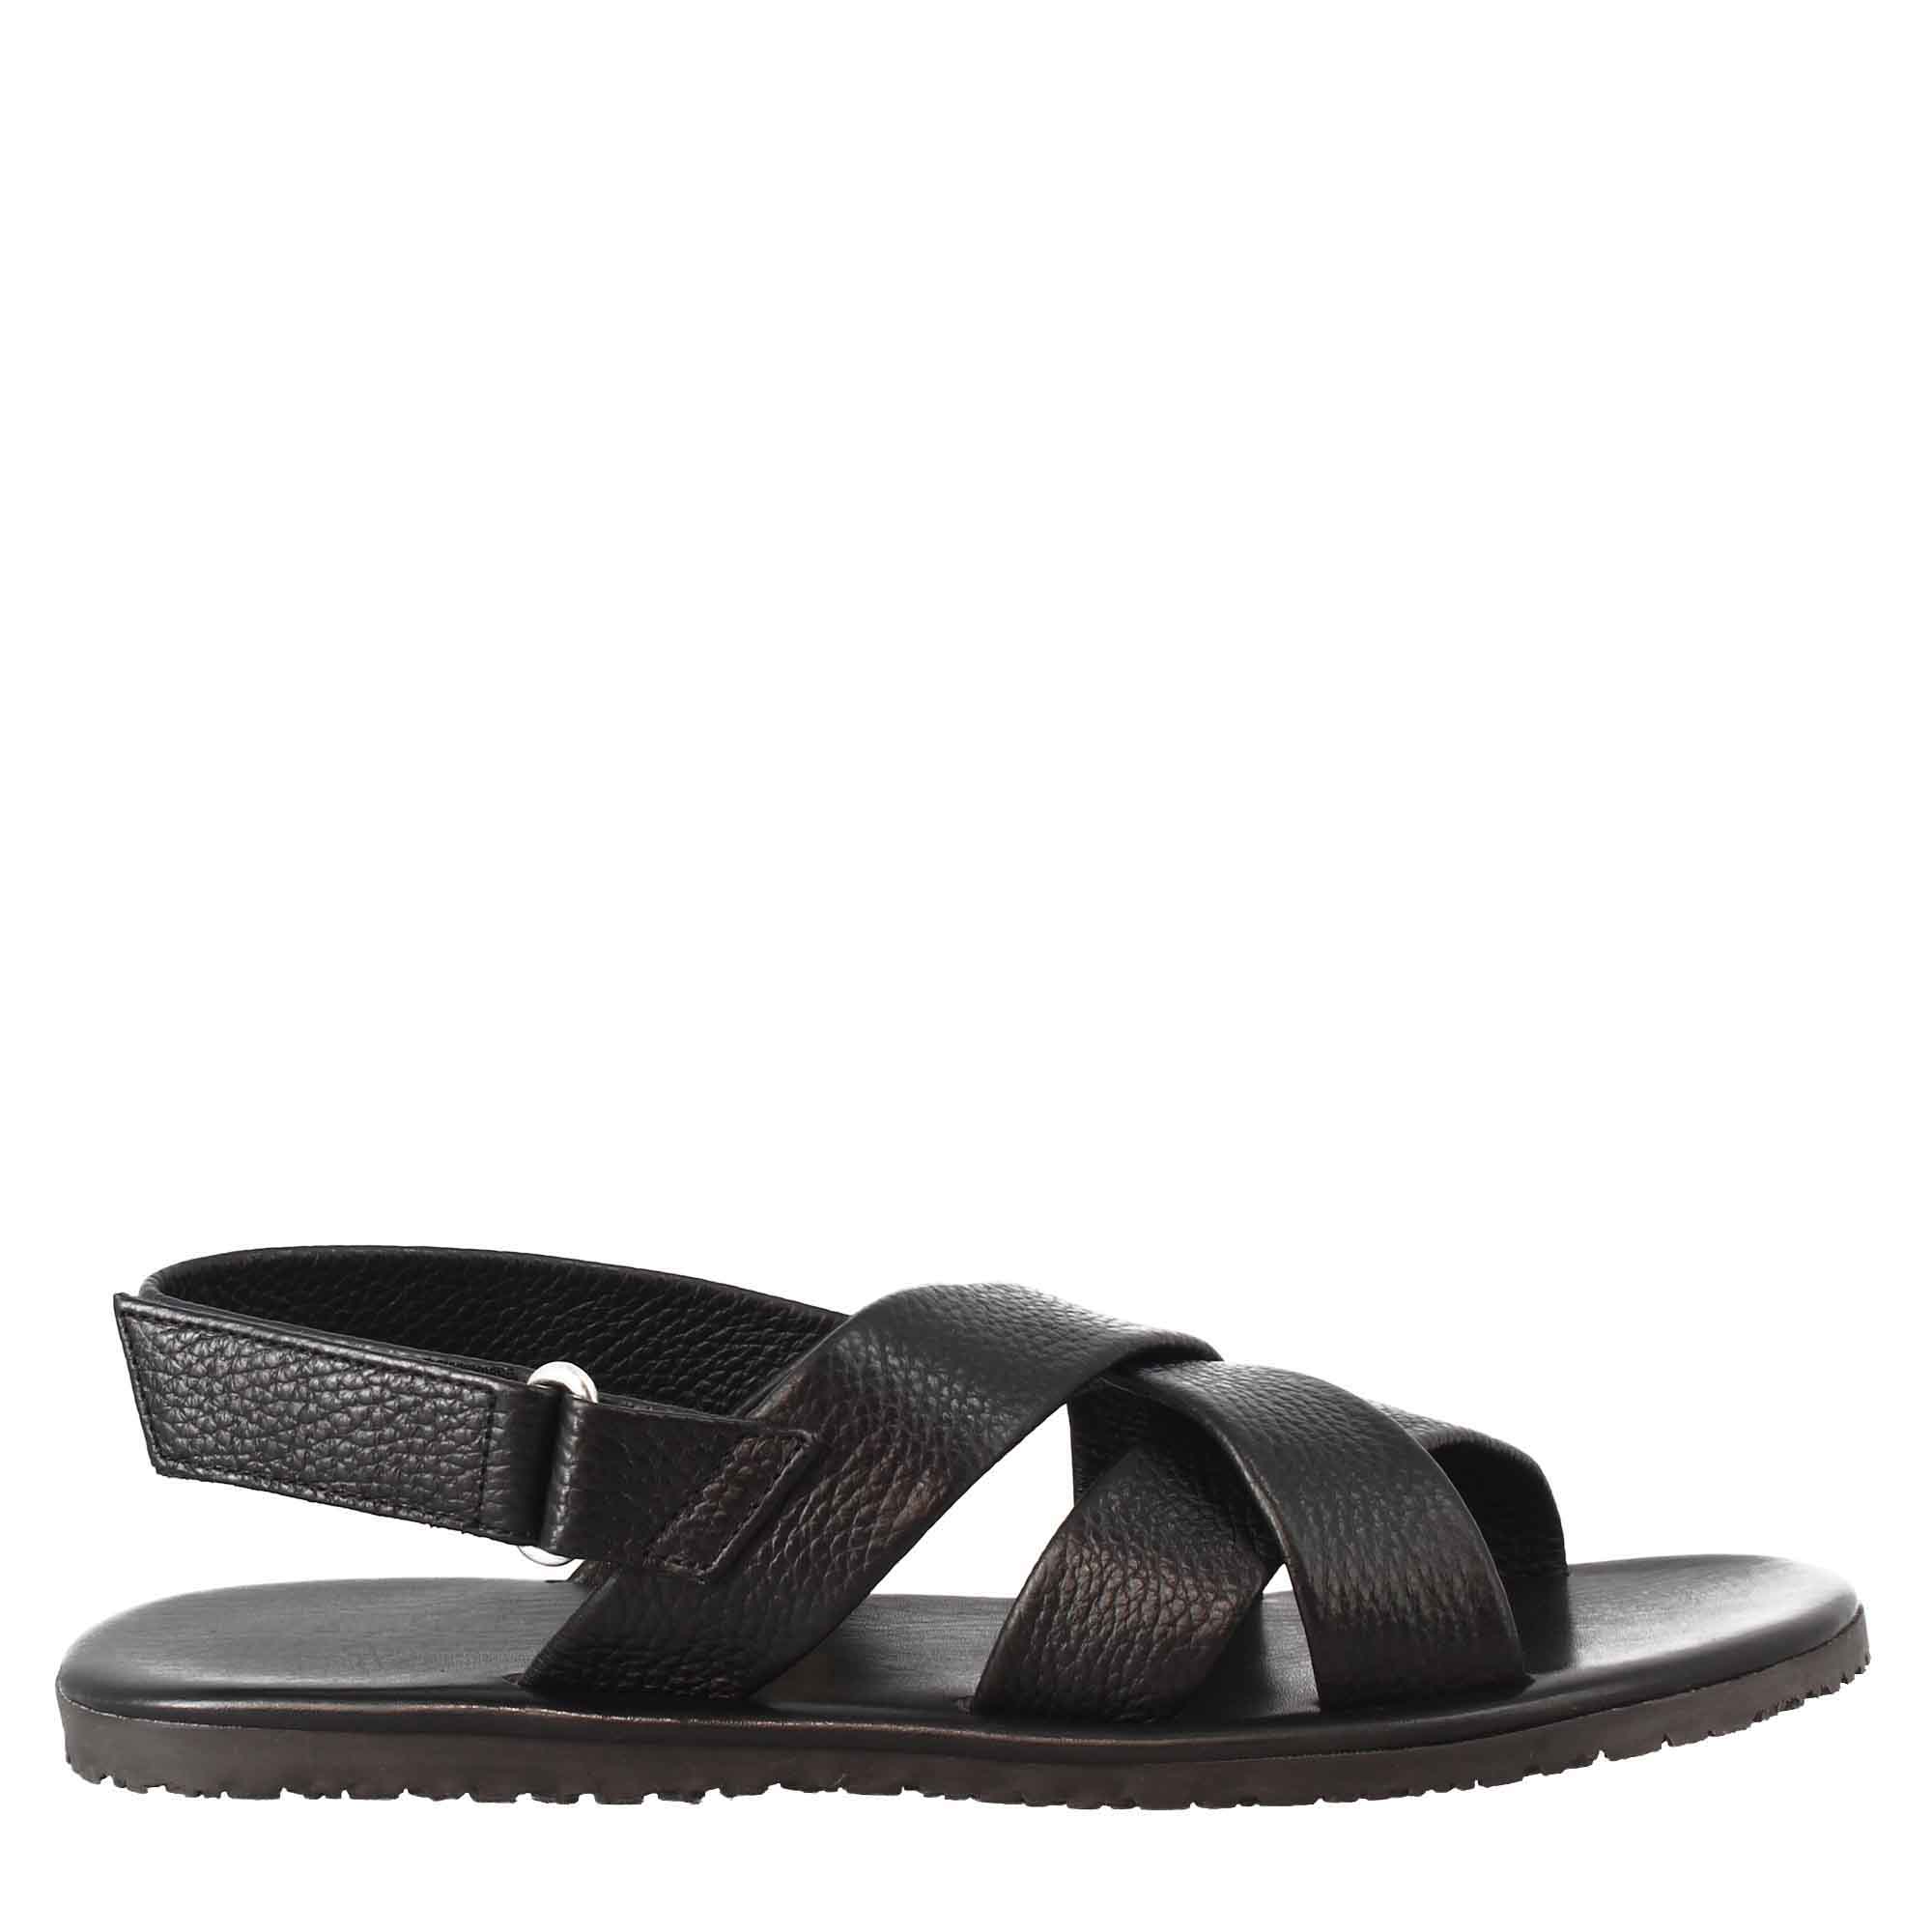 Men's Sandals in Black Leather with Velcro closure